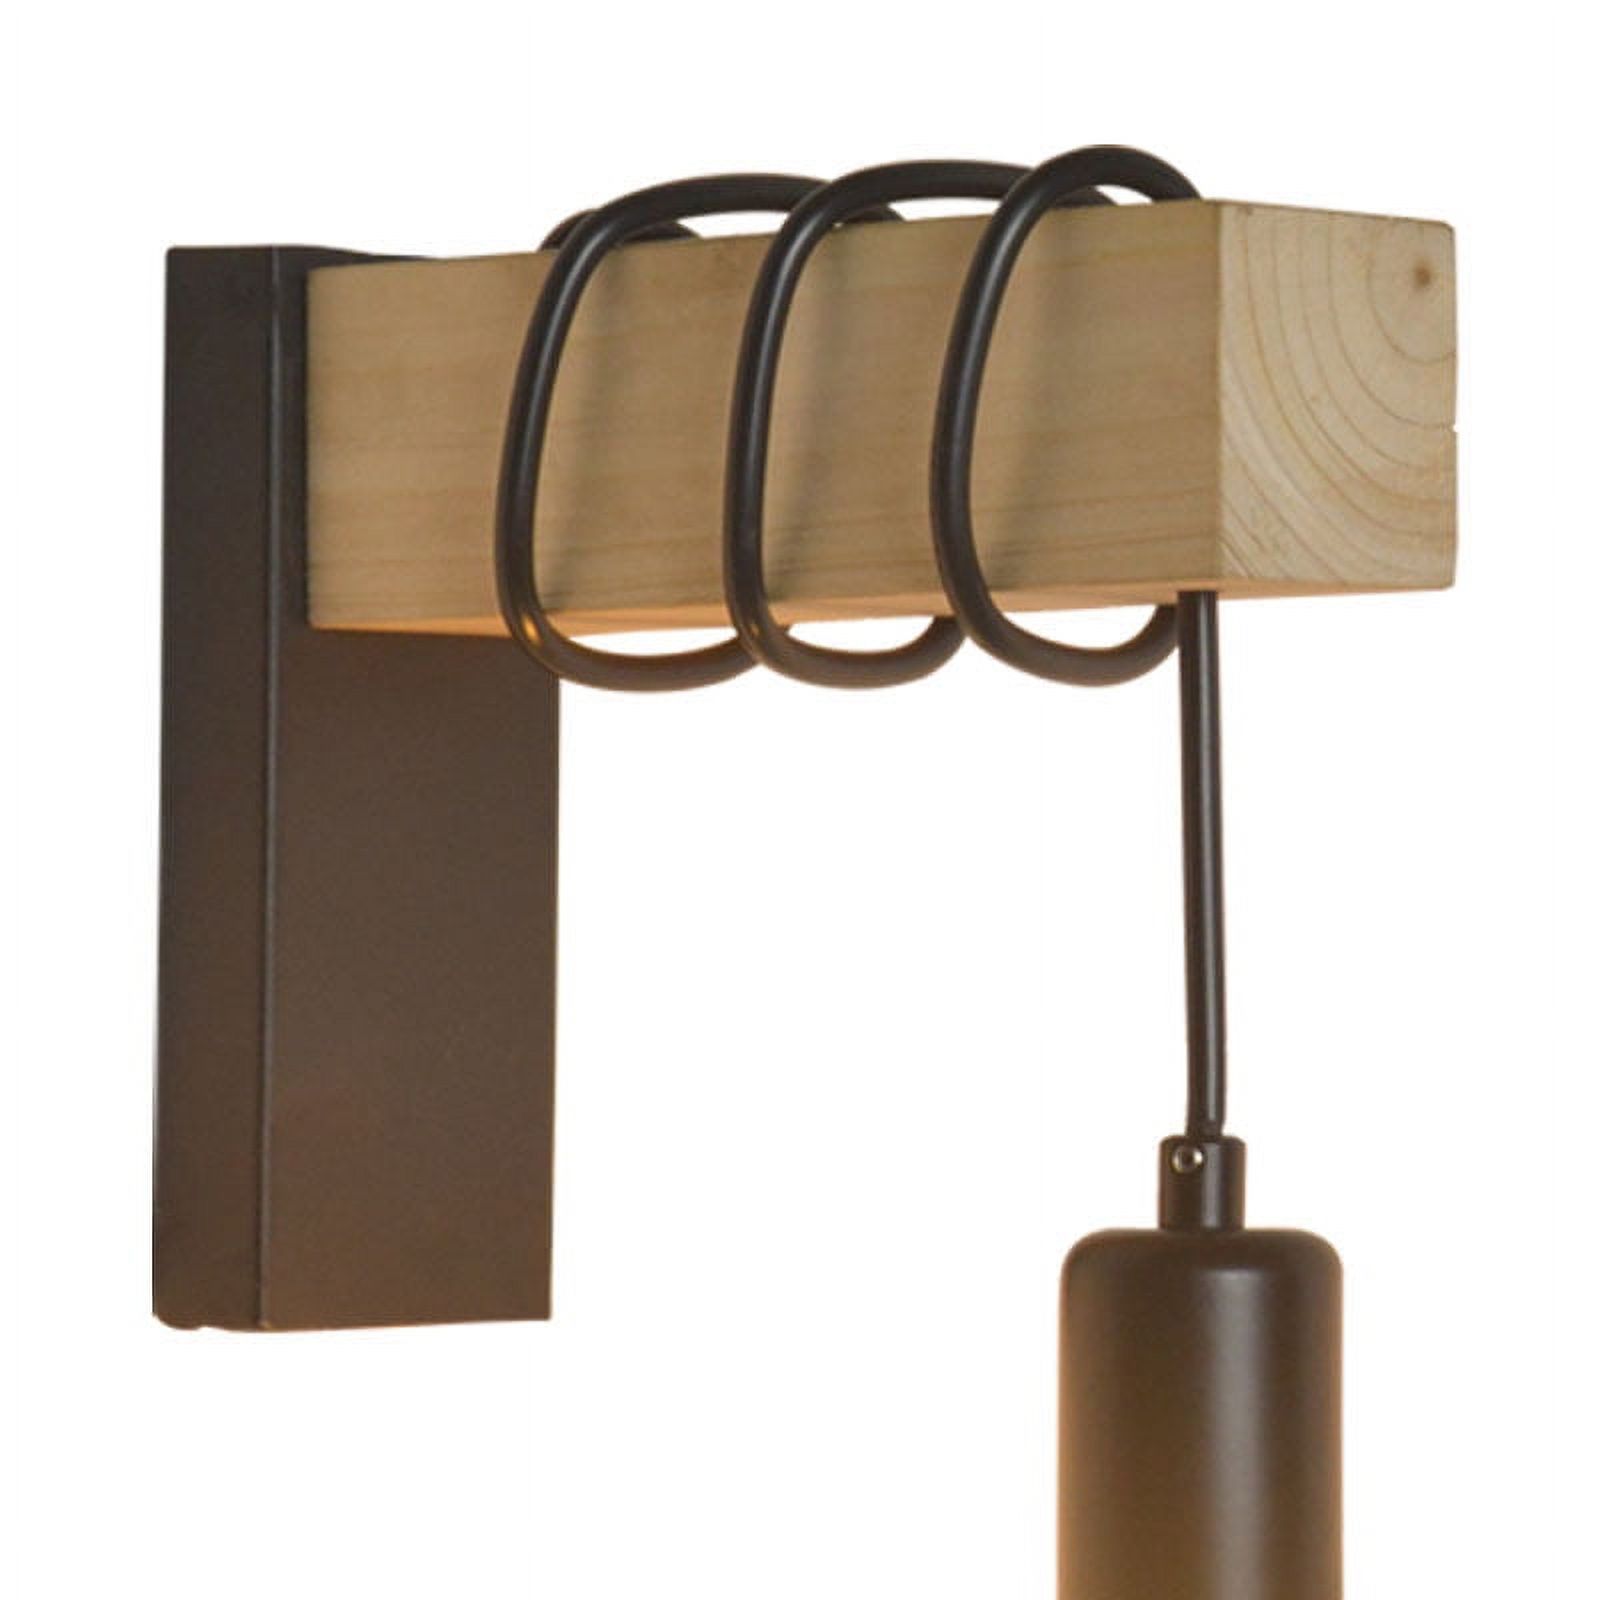 Wall Lamp, Vintage Industrial Design Flame Wall Lamp, Steel And Wood Retro Lamp,socket: E27without Bulb - image 1 of 2